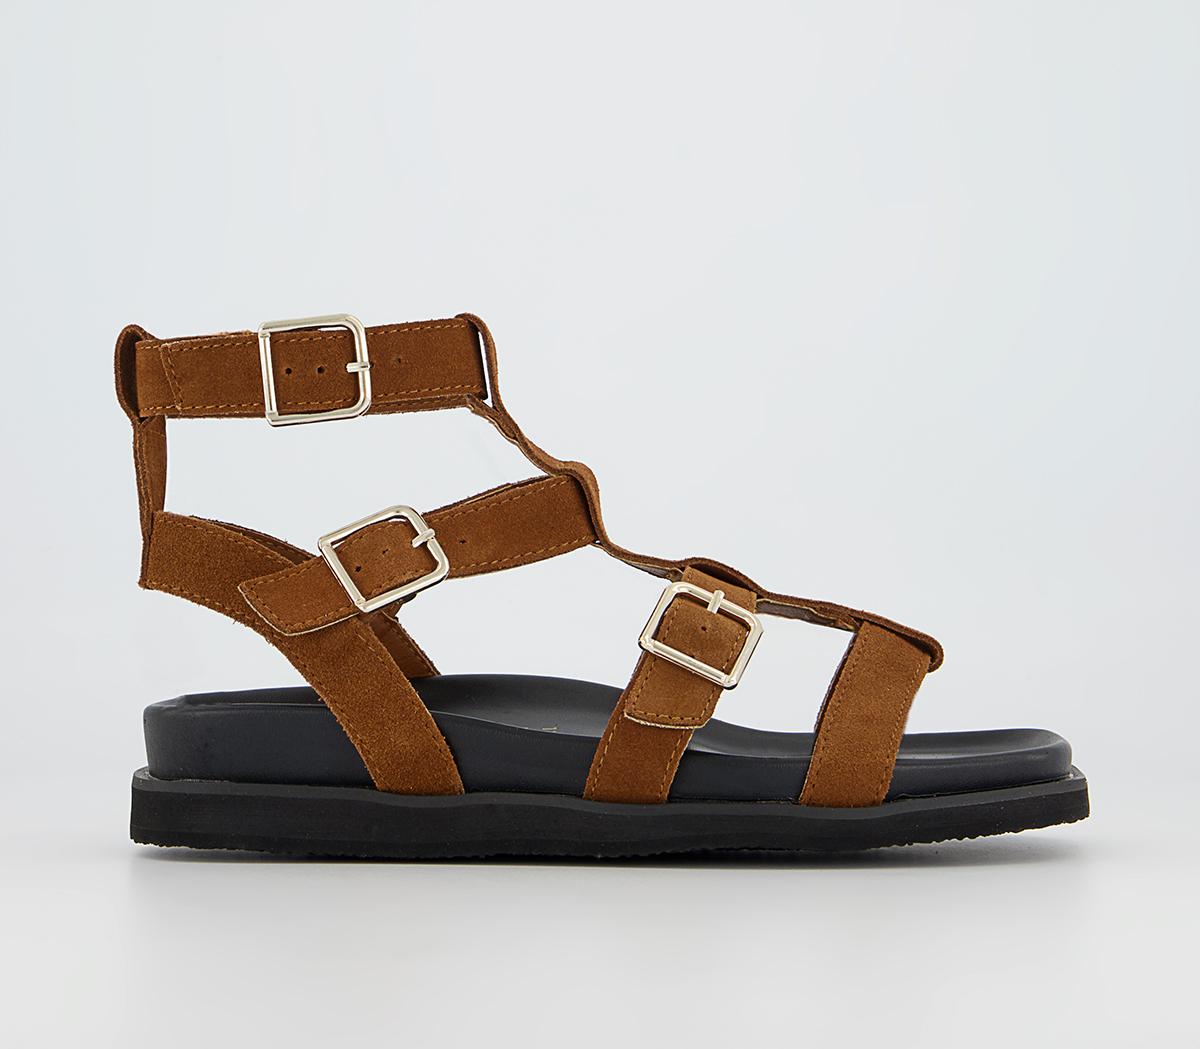 OfficeSancha Square Toe Gladiator Footbed SandalsTan Suede